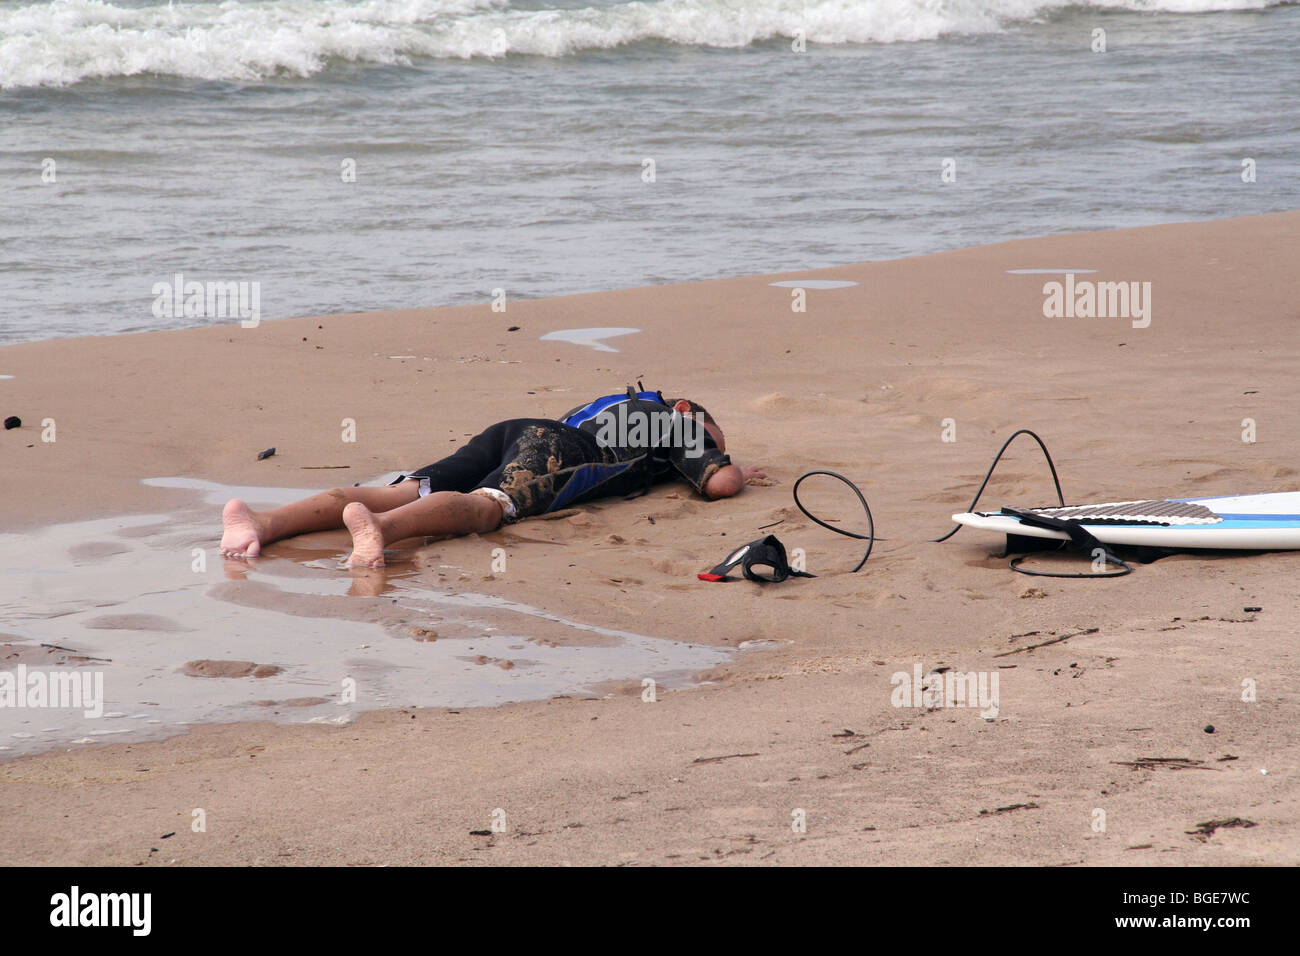 Small surfer exhausted and sleeping on beach near surf Stock Photo